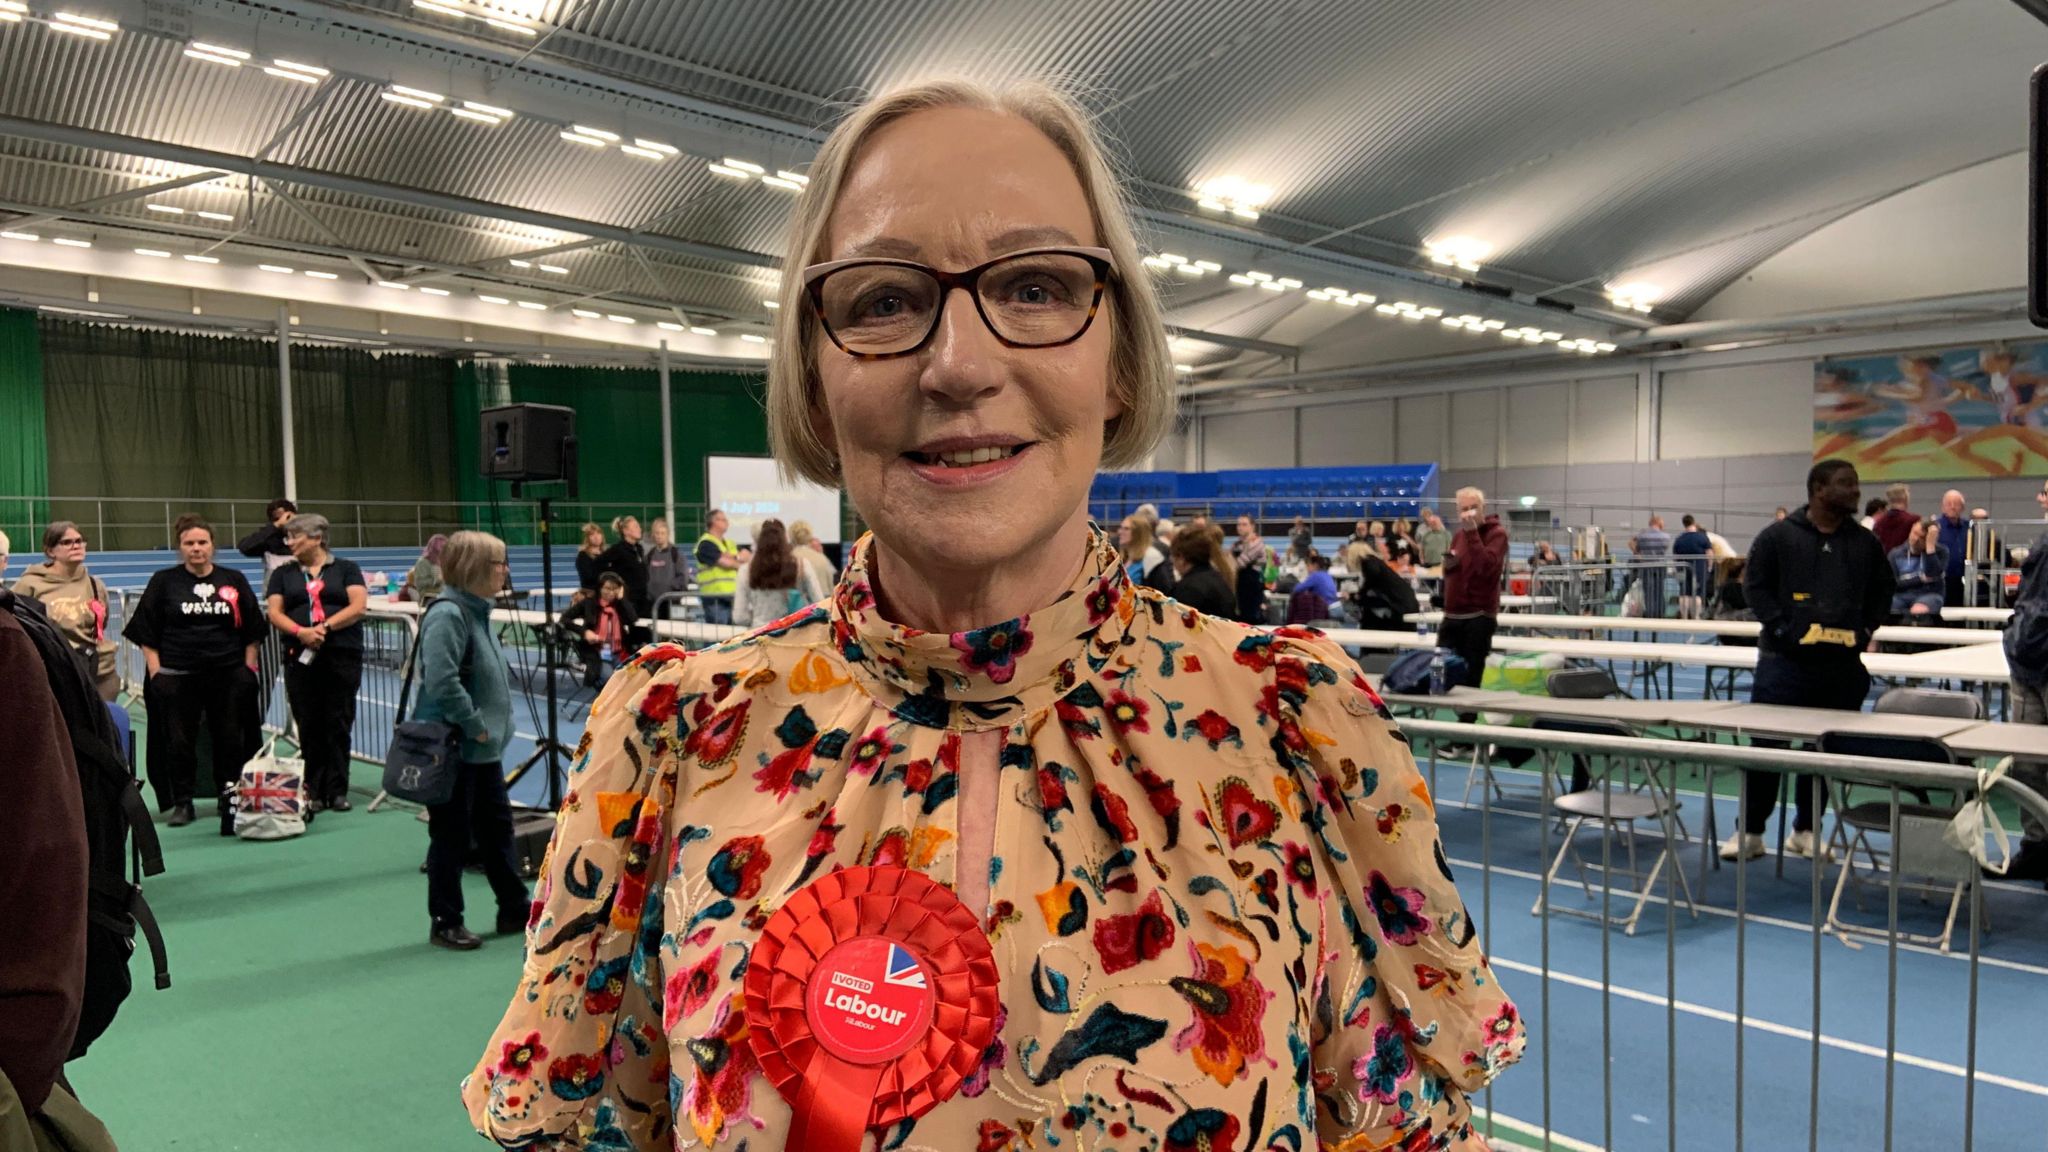 MP for Sheffield Brightside and Hillsborough, Gill Furniss